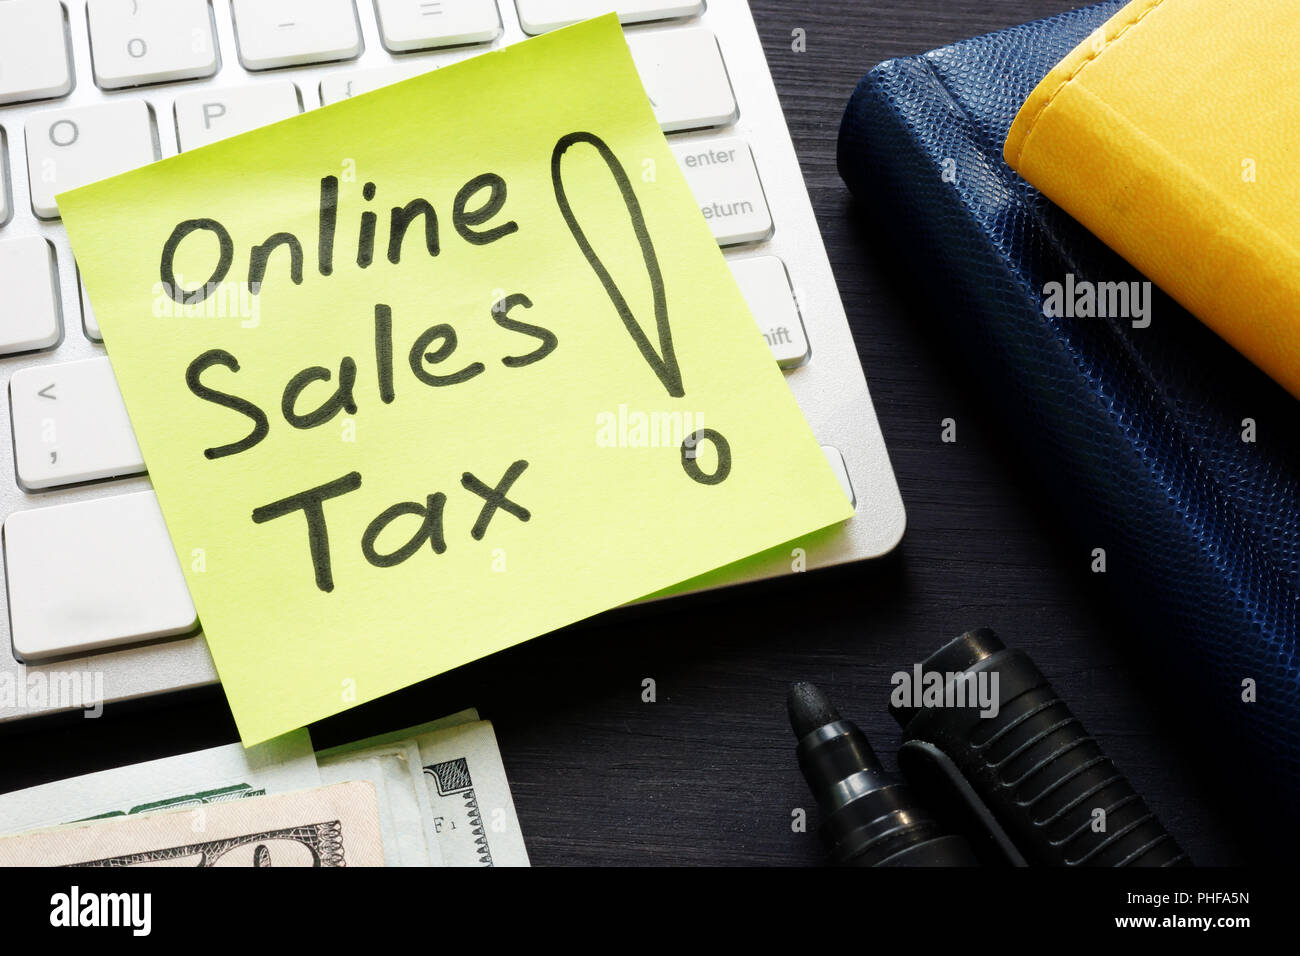 Online sales tax on a keyboard and money. Stock Photo